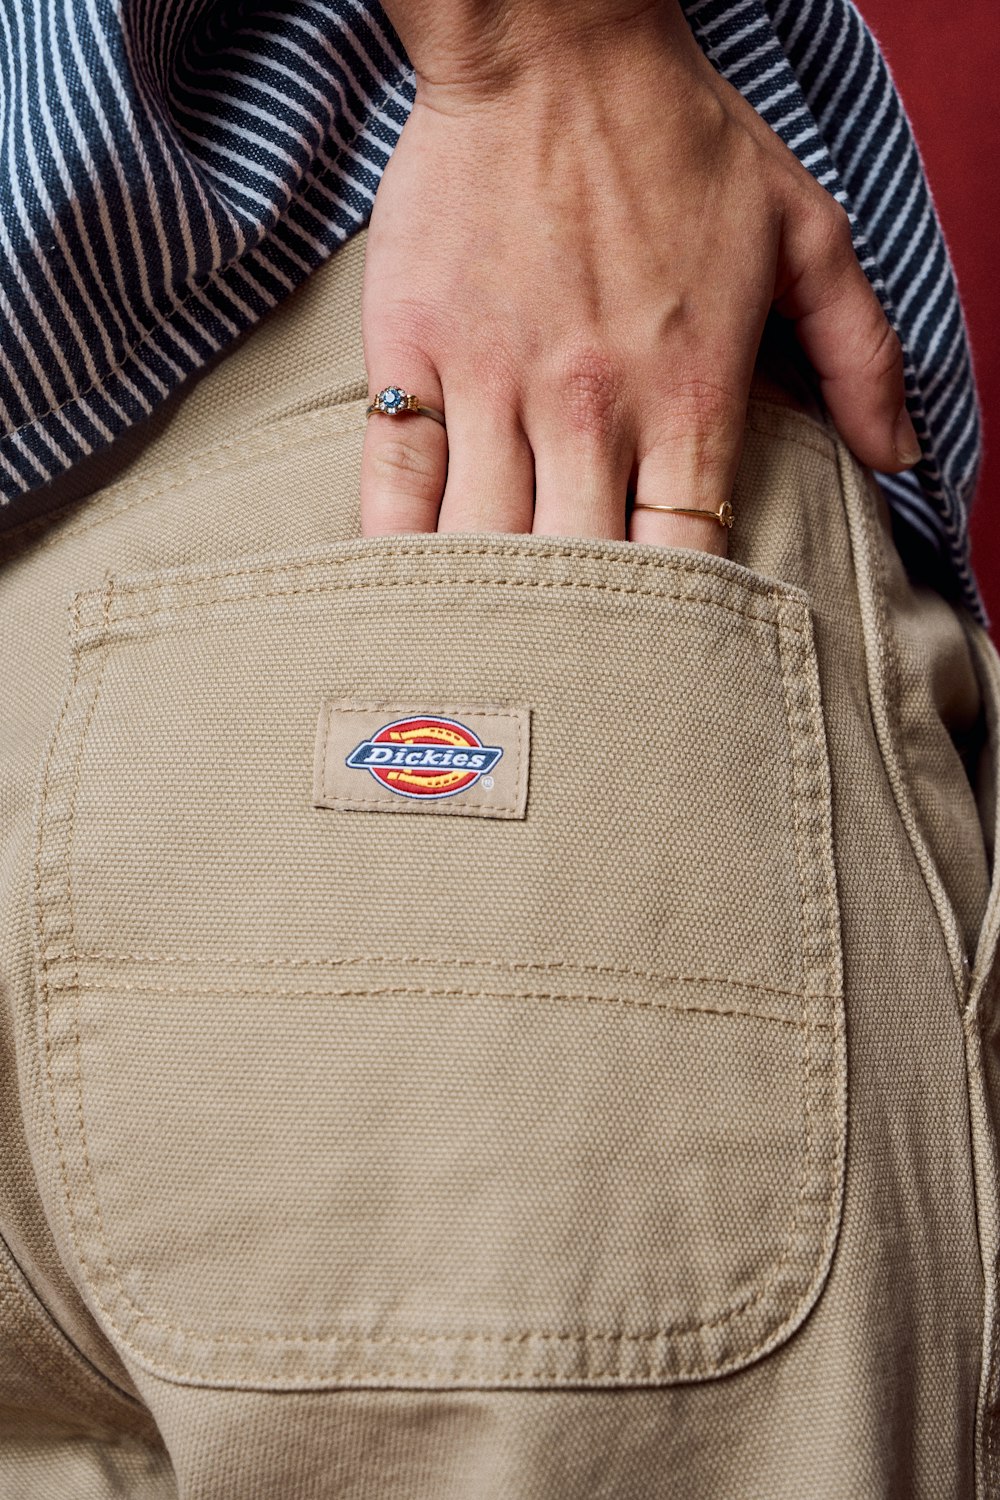 a close up of a person's pants with a badge on it